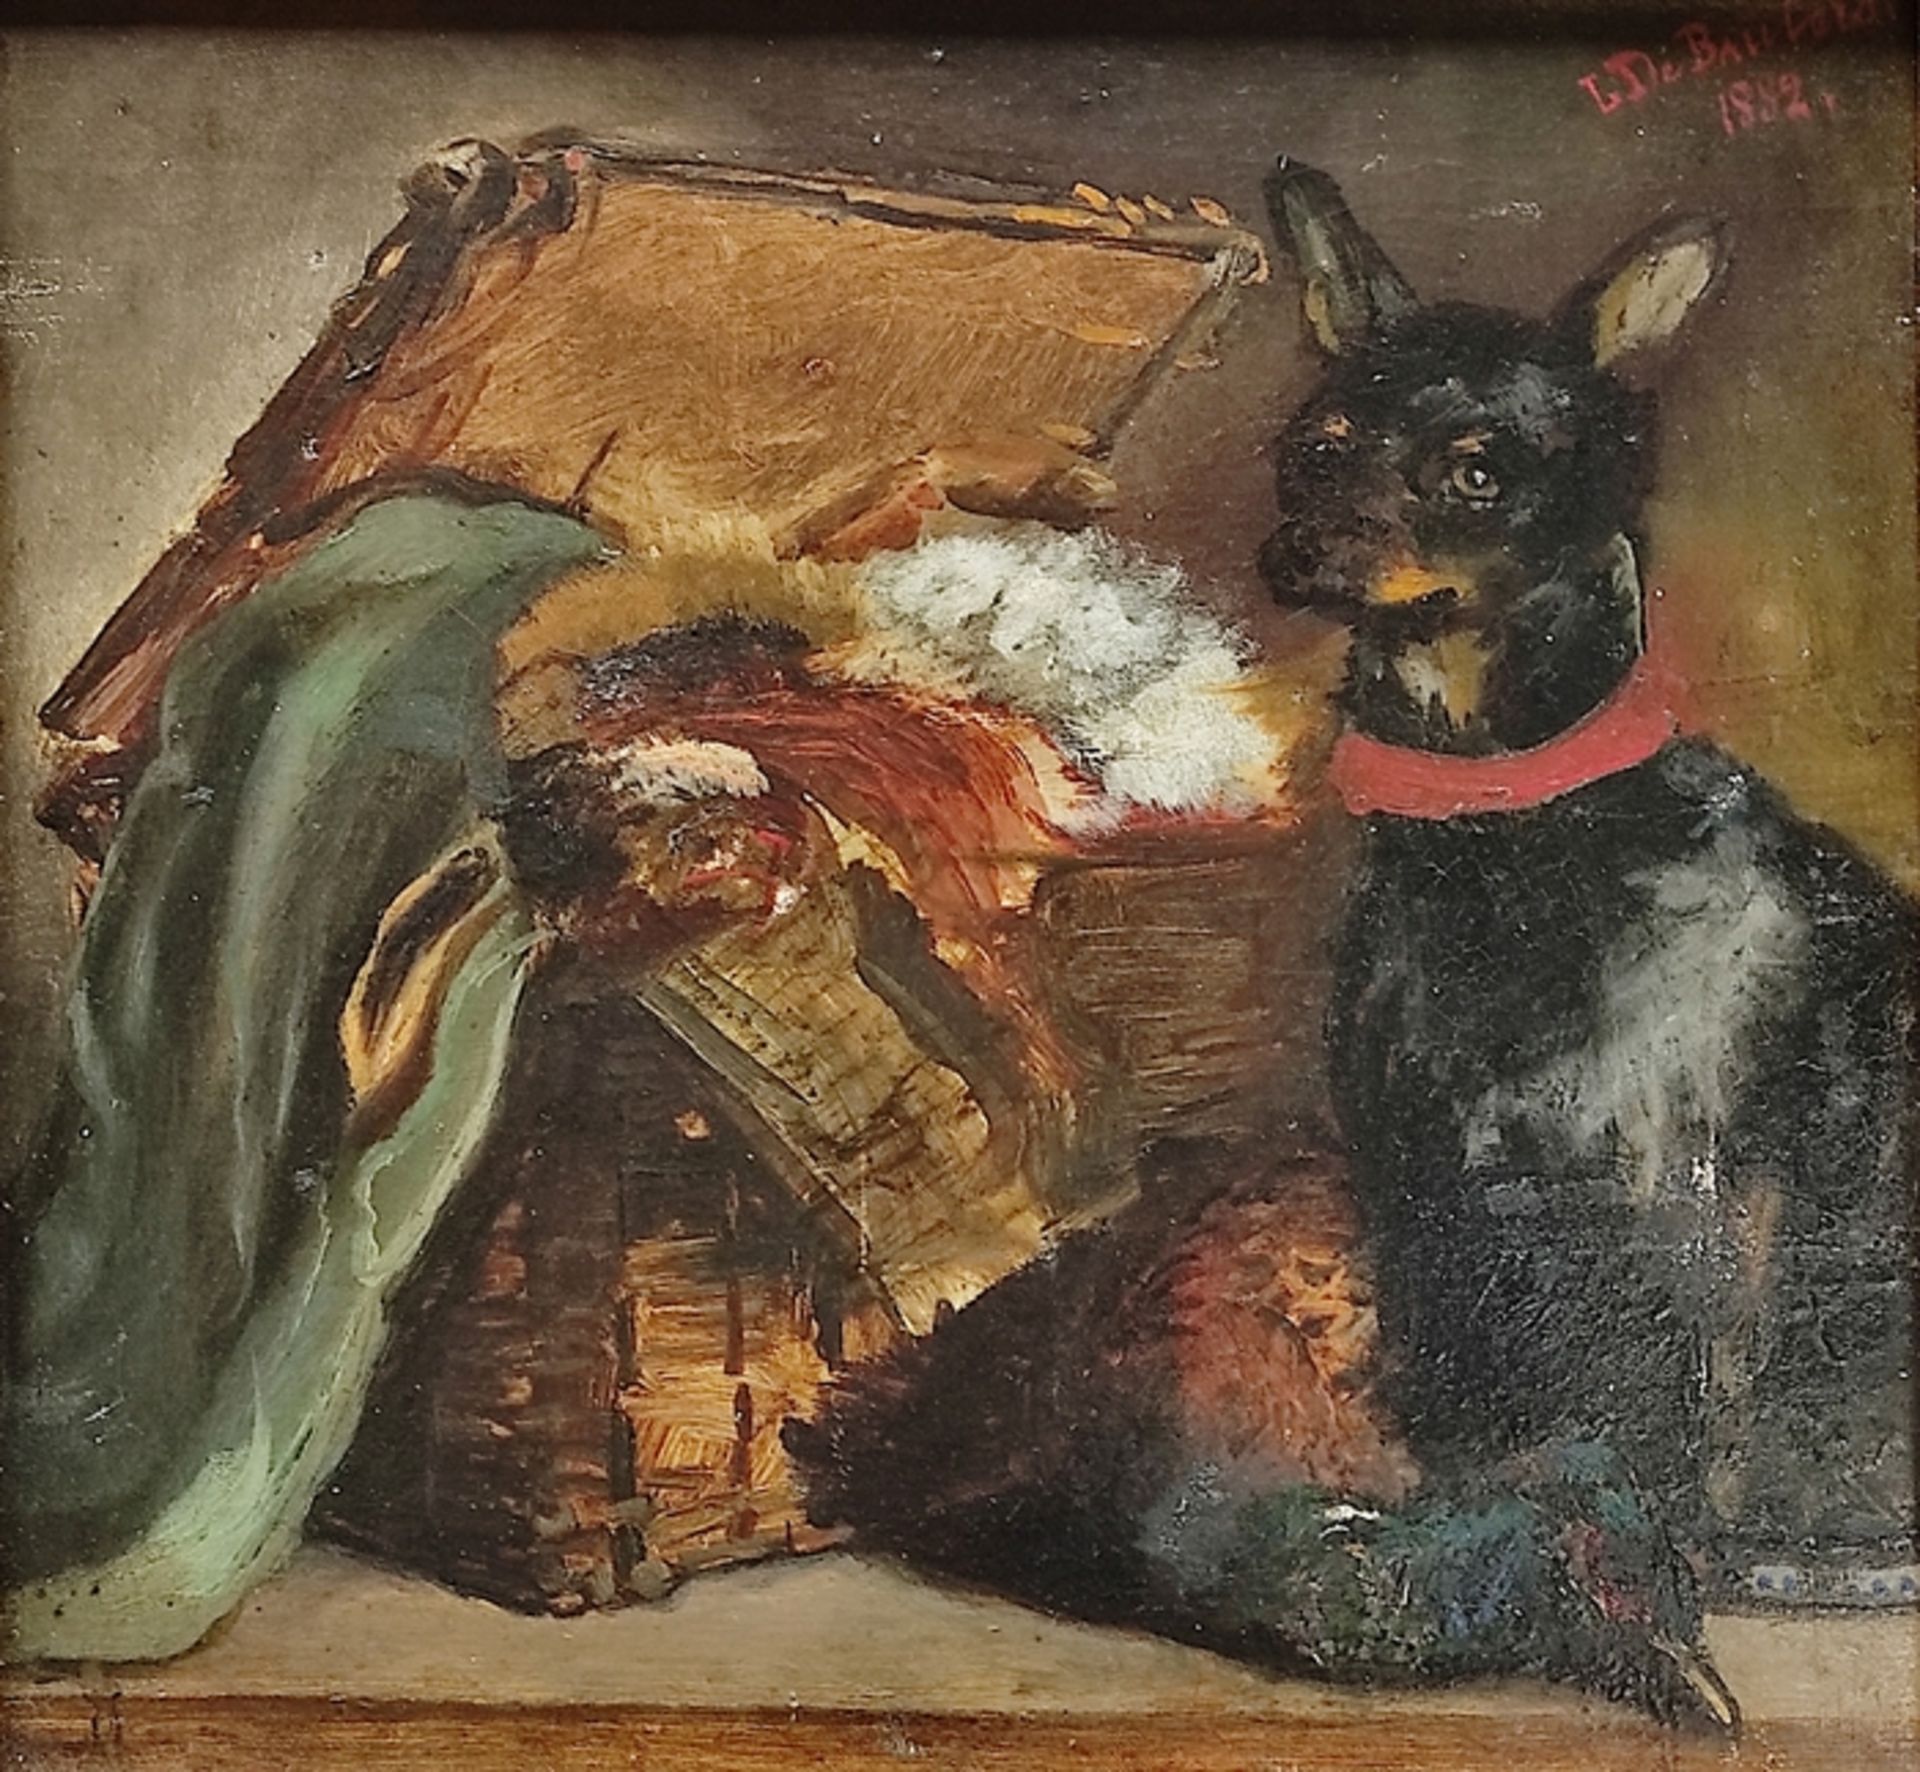 De Baulers, L. (19th century) "Hunting Still Life" with Hare, Pheasant and Pinscher, oil on canvas,